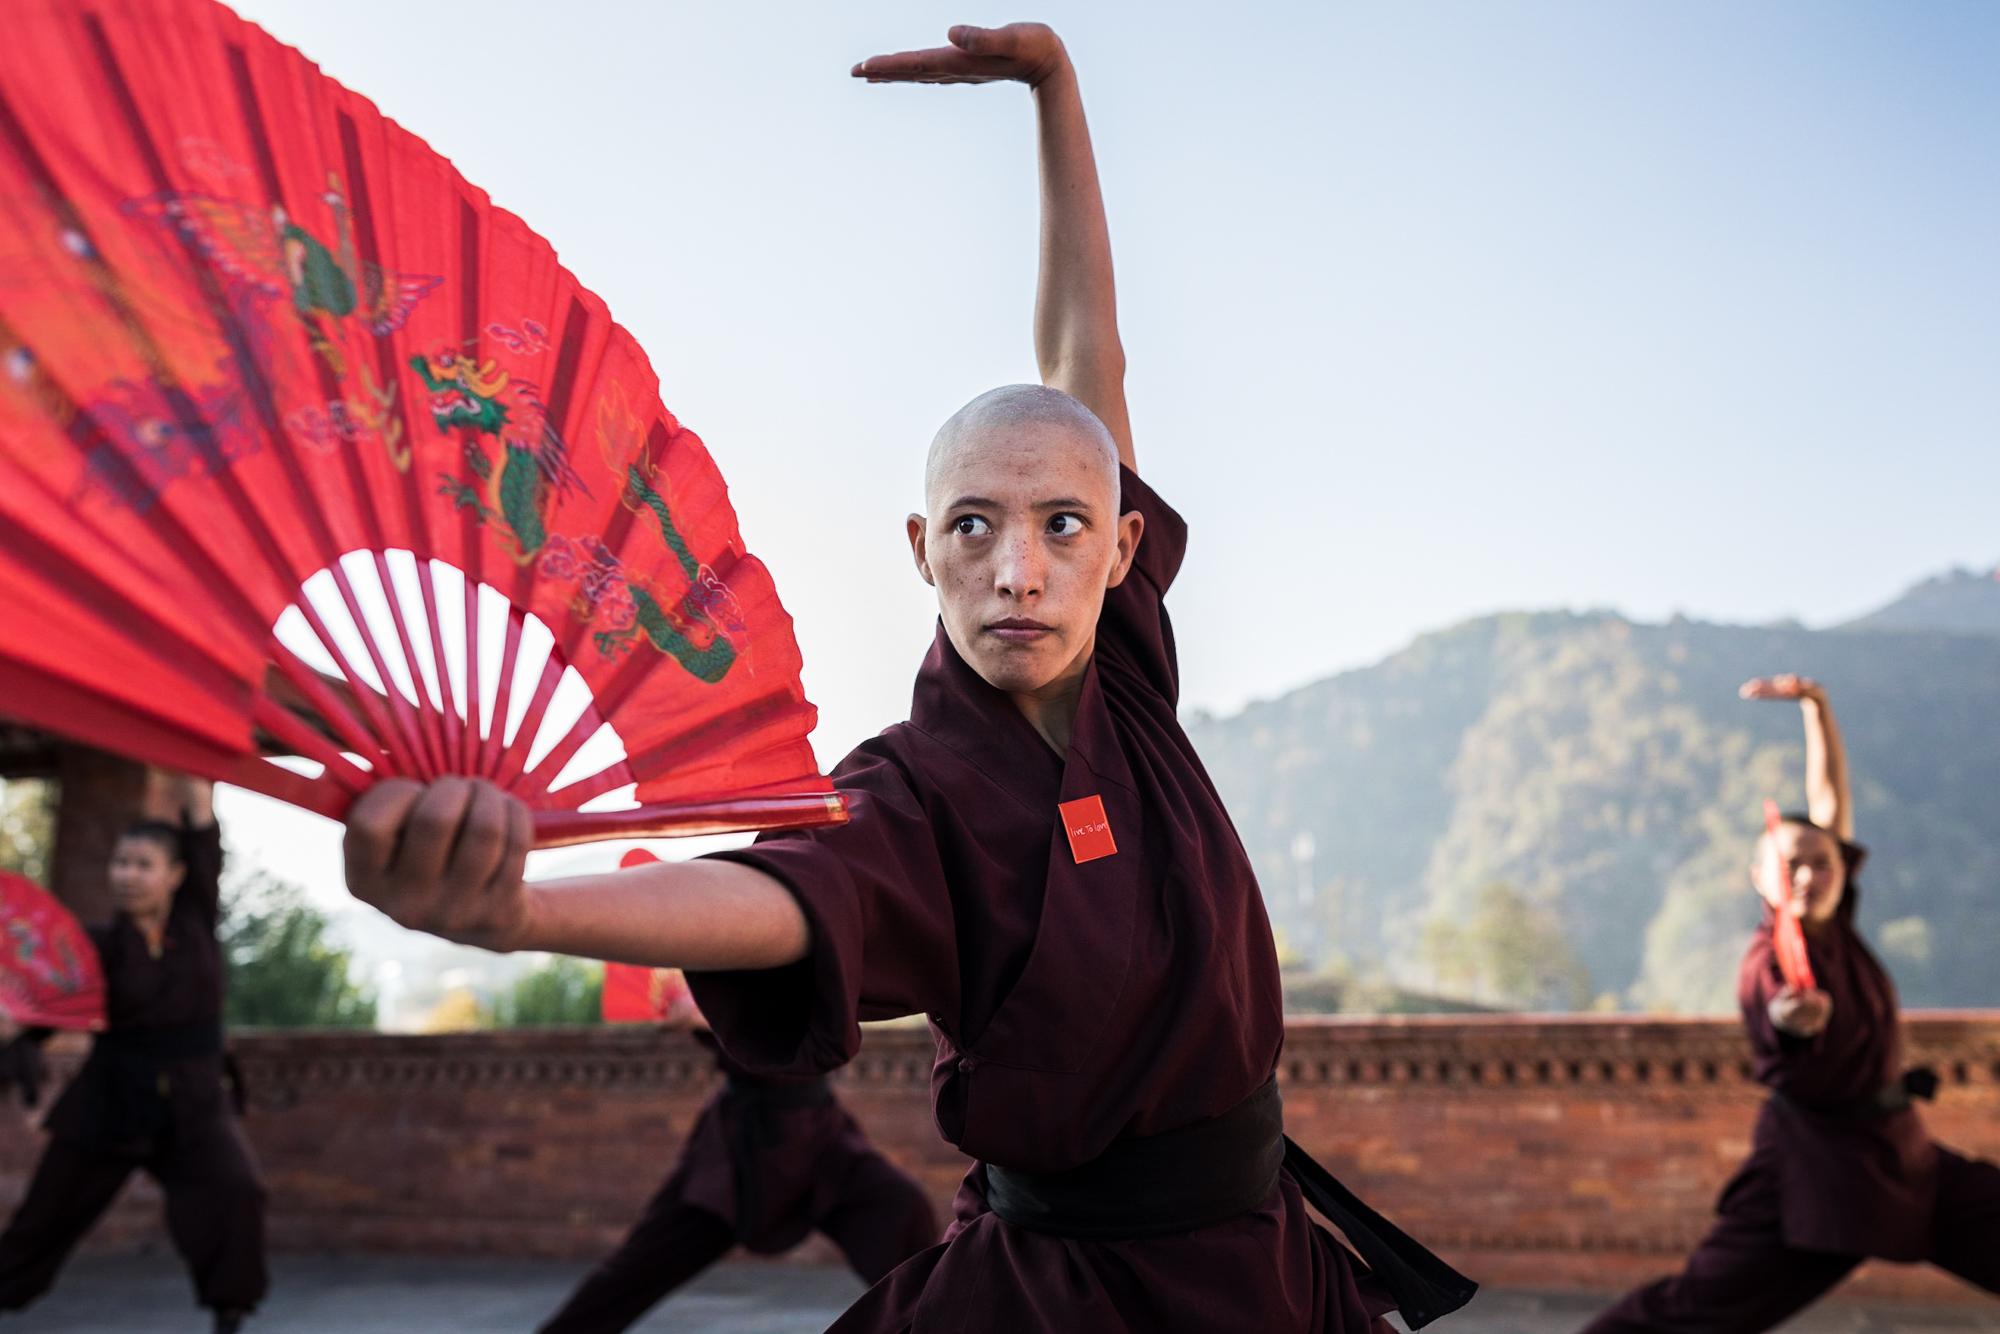 THE KUNG FU NUNS OF THE HIMALAYAS  - Jigme Rupa Lhamo, 26, pictured during Kung Fu training at...